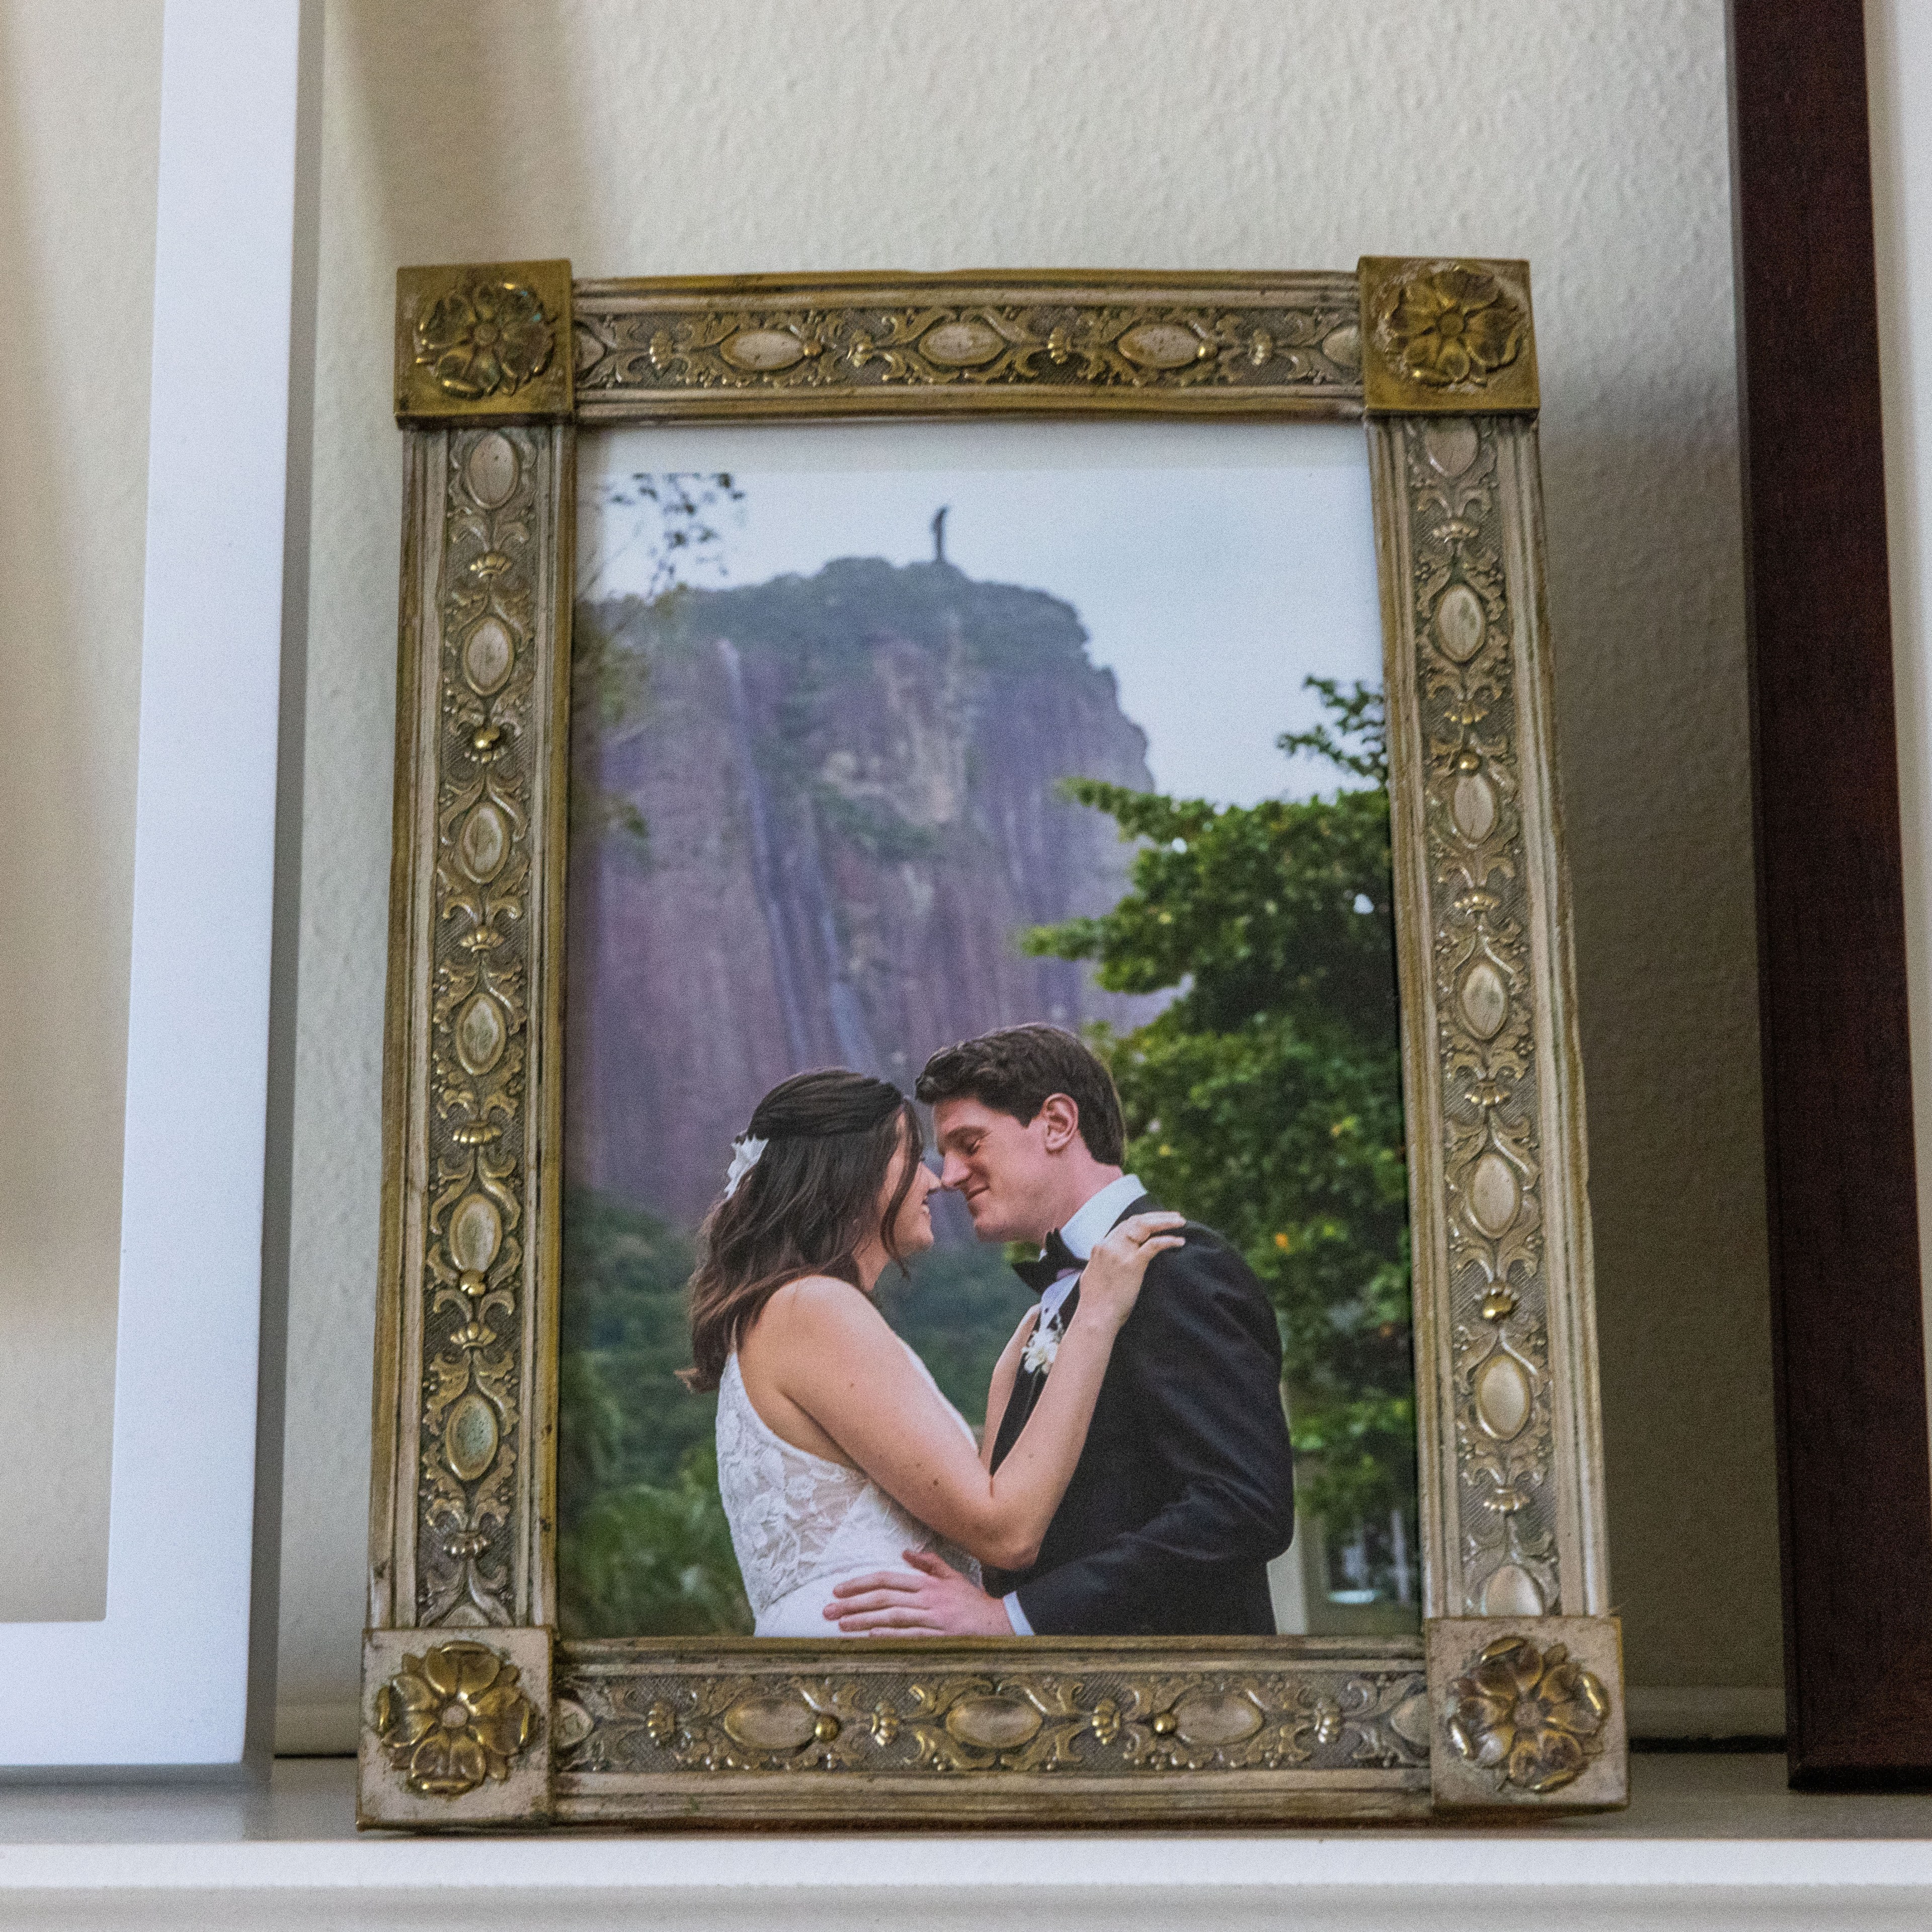 A framed photo shows a bride and groom embracing outside, with a large statue on a hill in the background. The ornate gold frame surrounds the image.